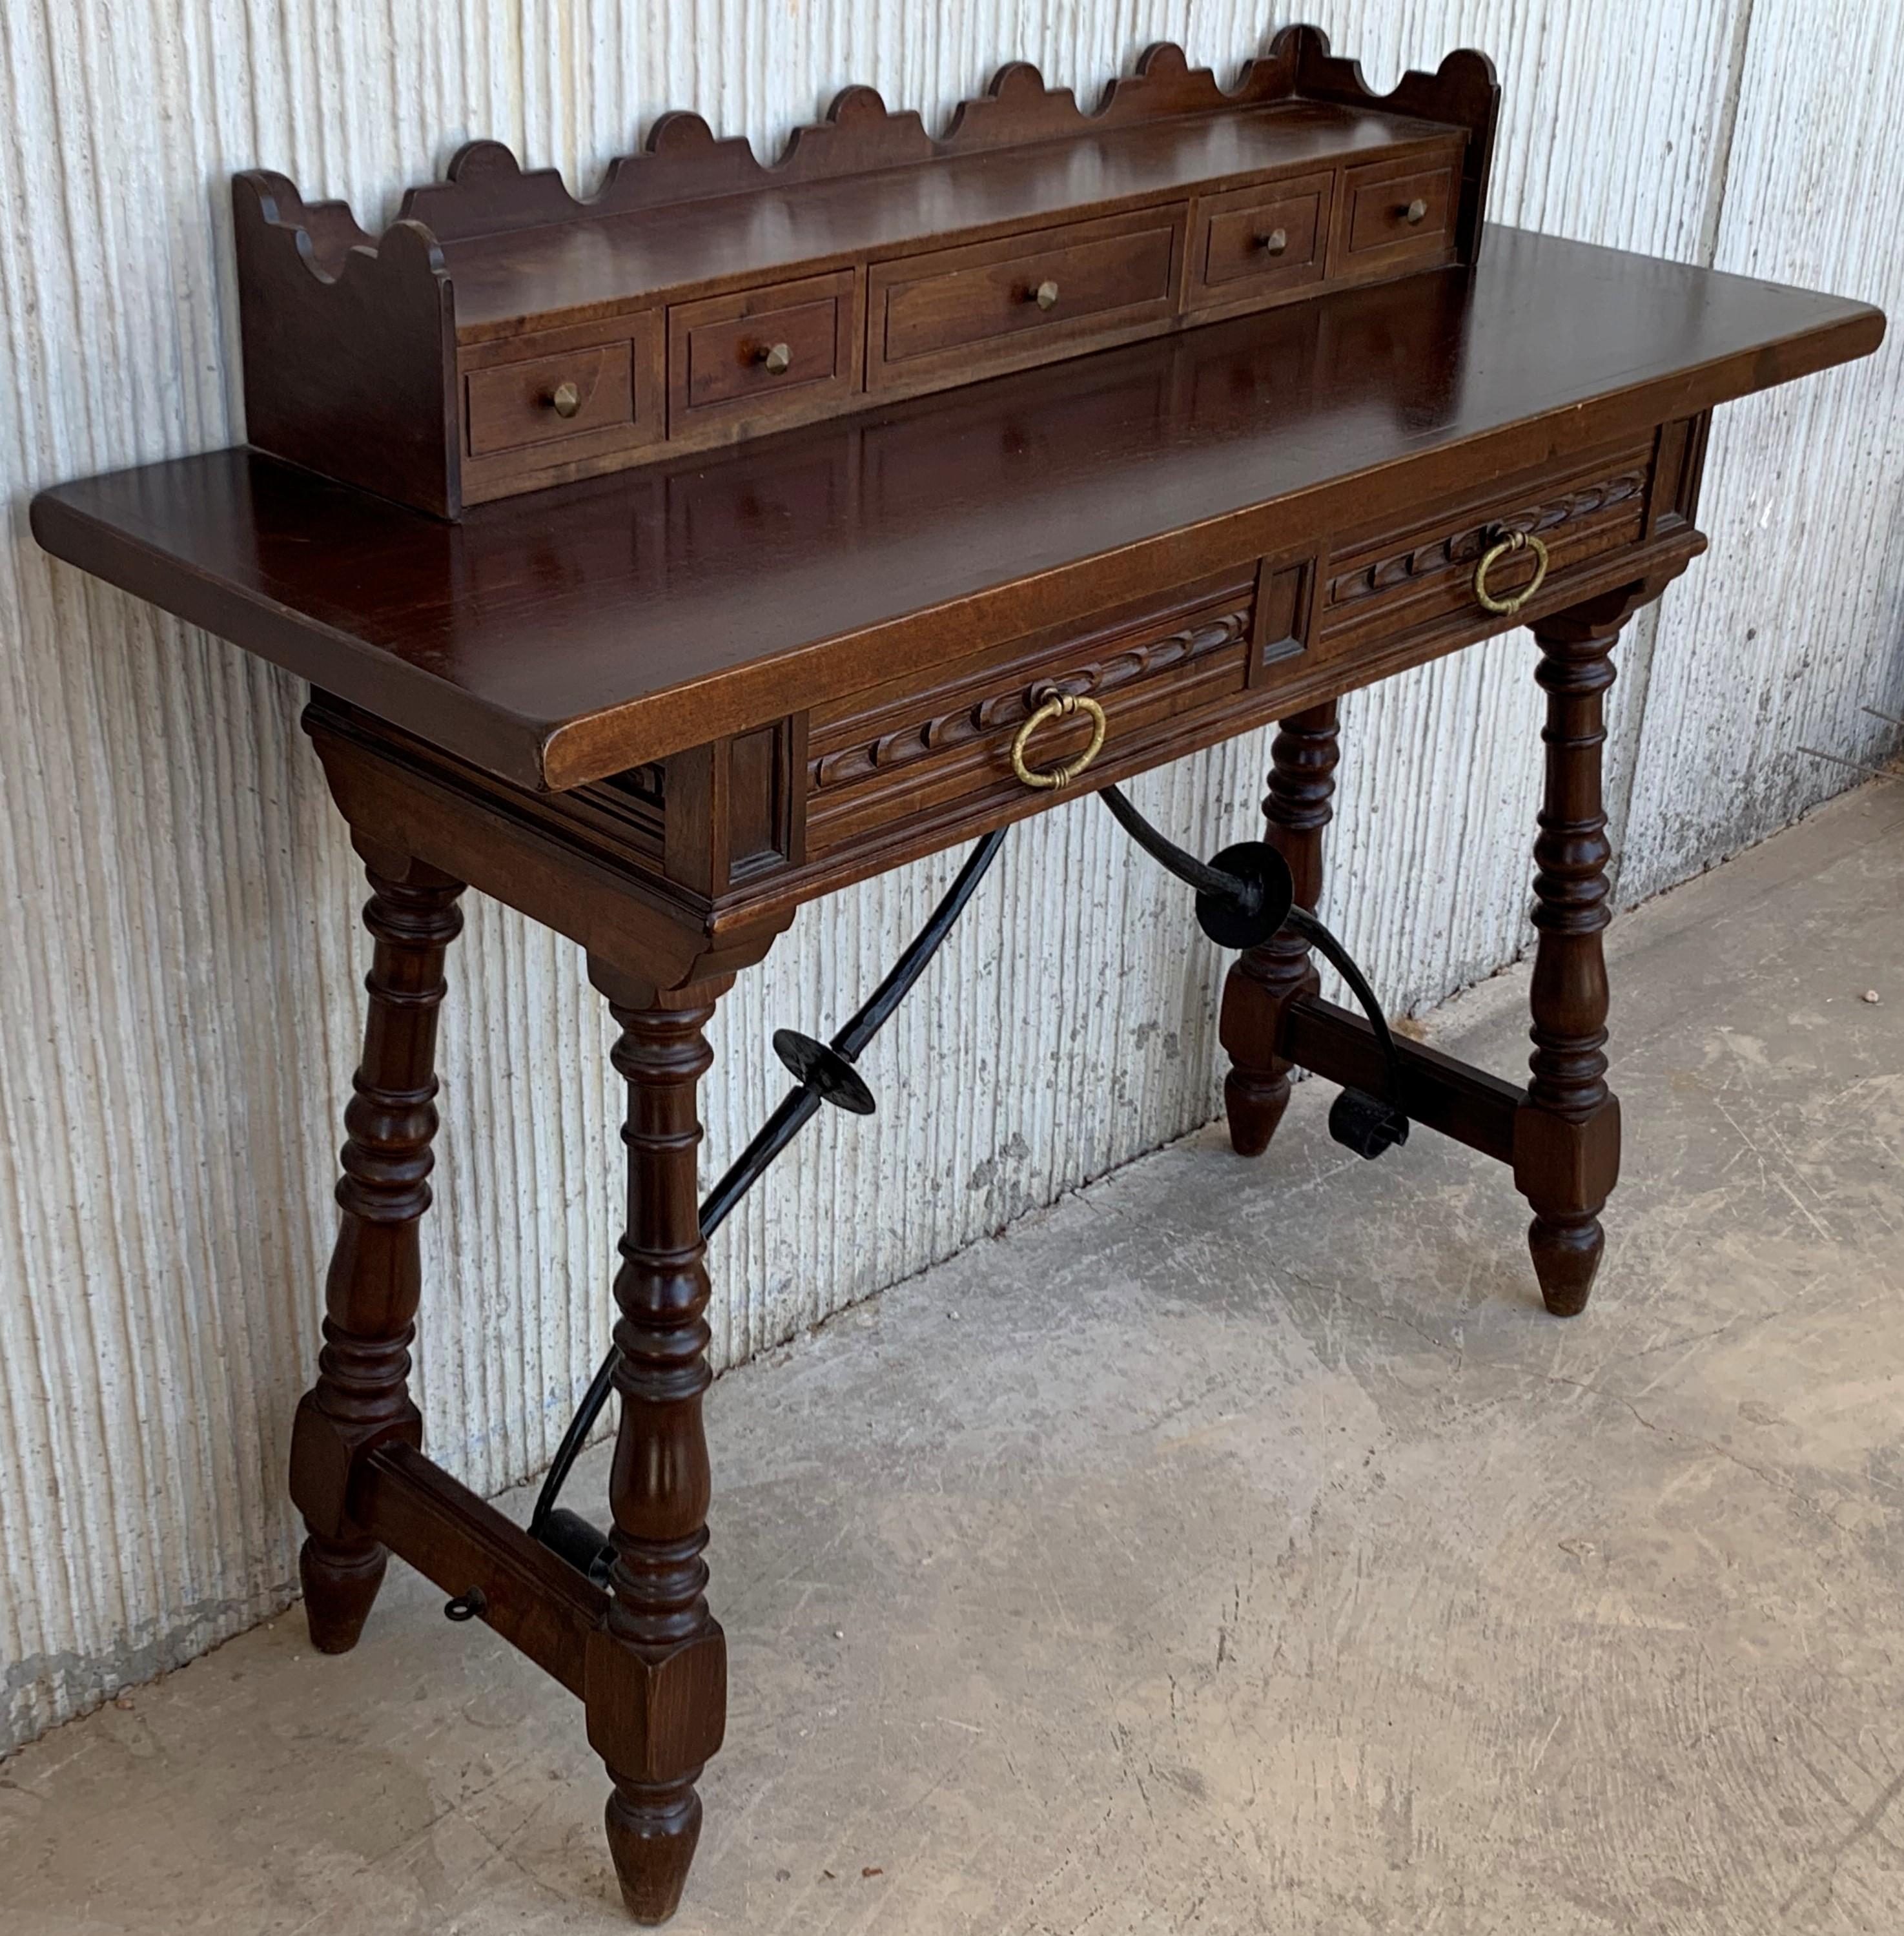 19th century catalan Spanish lady desk or console tablein carved walnut & iron stretcher with five up drawers and two in the base table.
Very heavy and resistant, ready for use.

Height to the top : 34.84in
Height to the table: 29.33in.